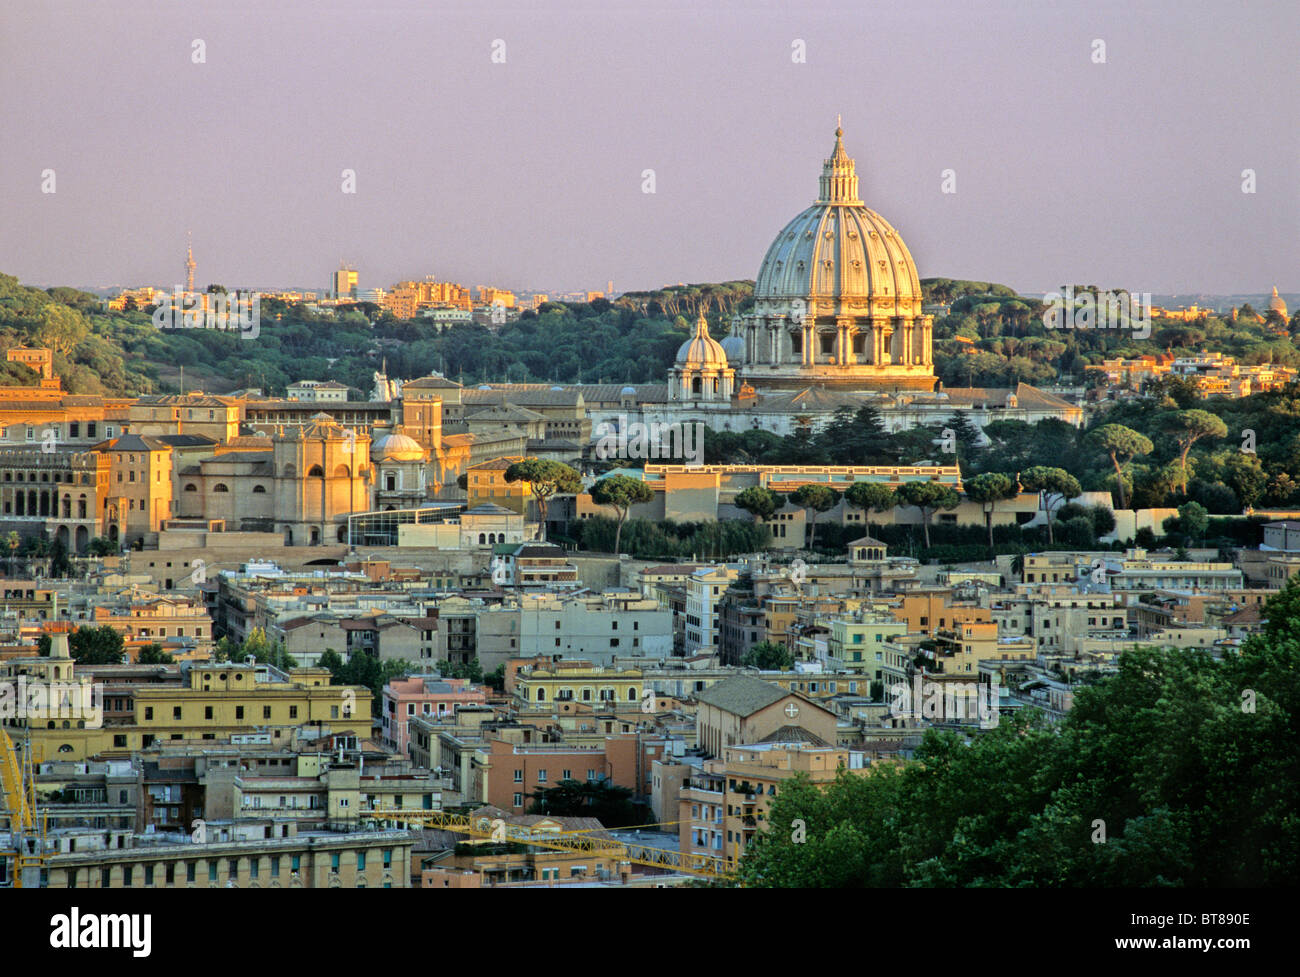 Cuppola, St. Peter's Basilica, Basilica of Saint Peter, in front of the Monte Gianicolo hill, Vatican city, Rome, Latium, Italy Stock Photo